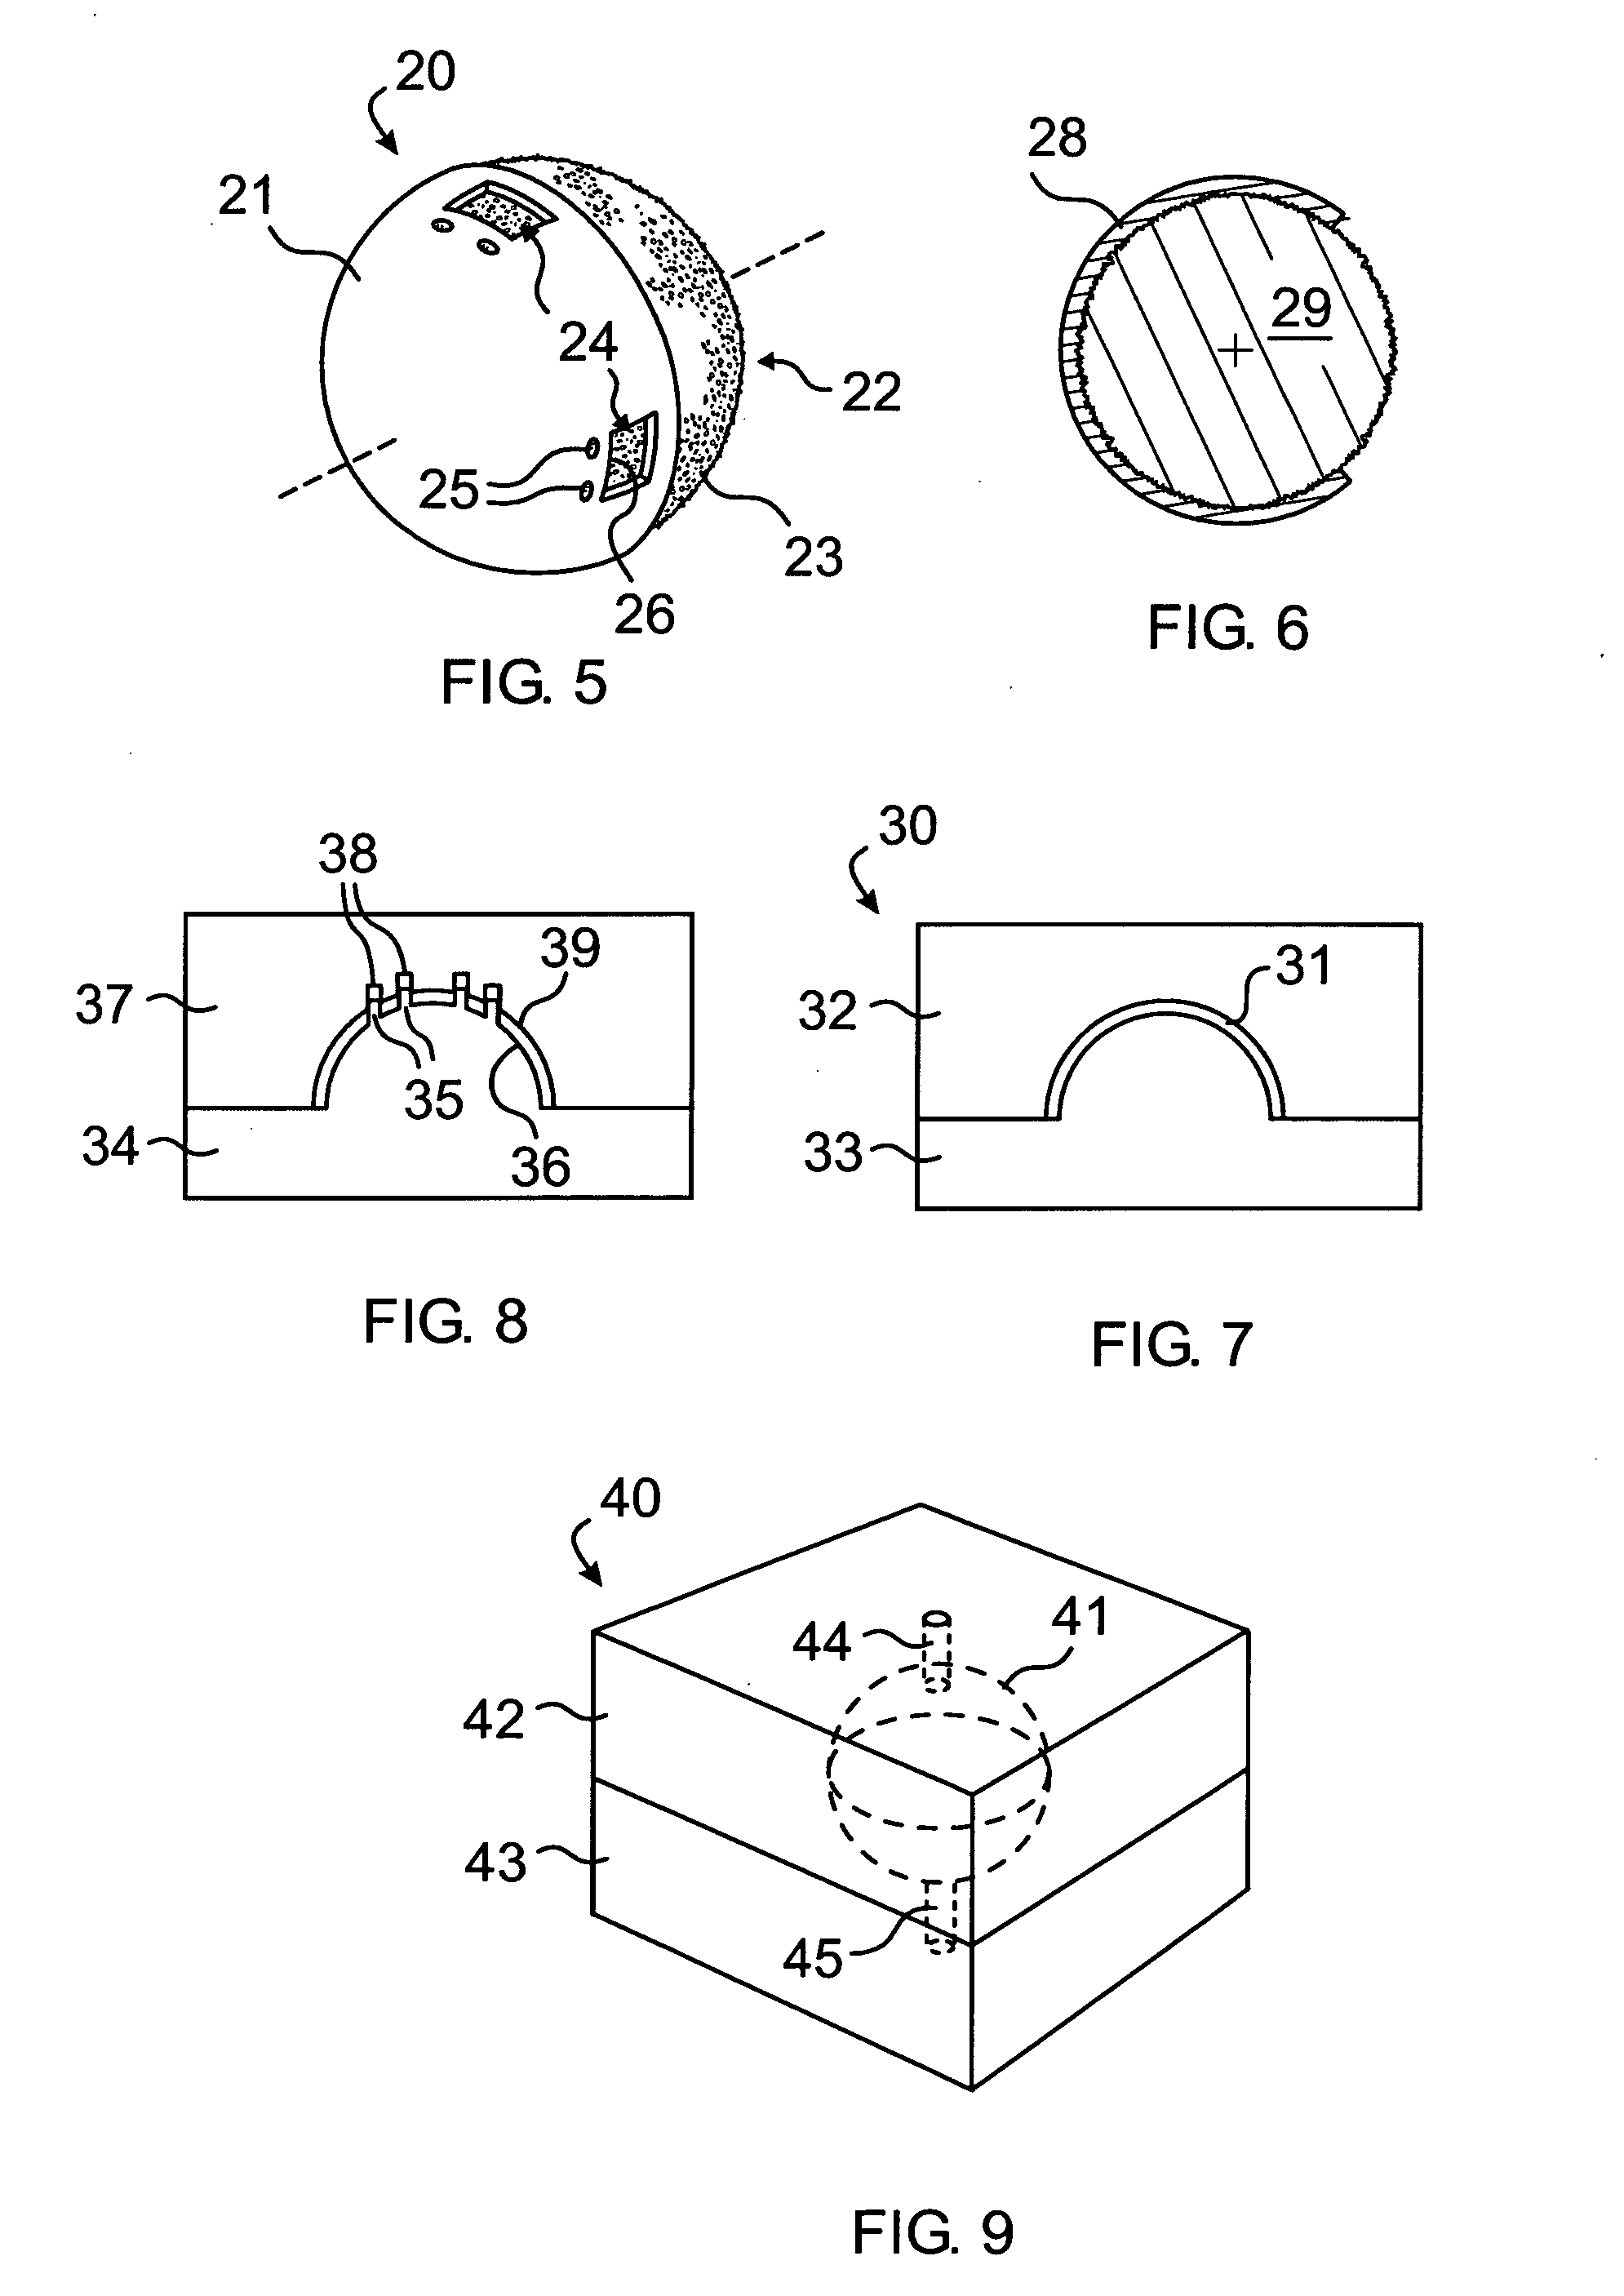 Vaulted perforated coating for orbital implants